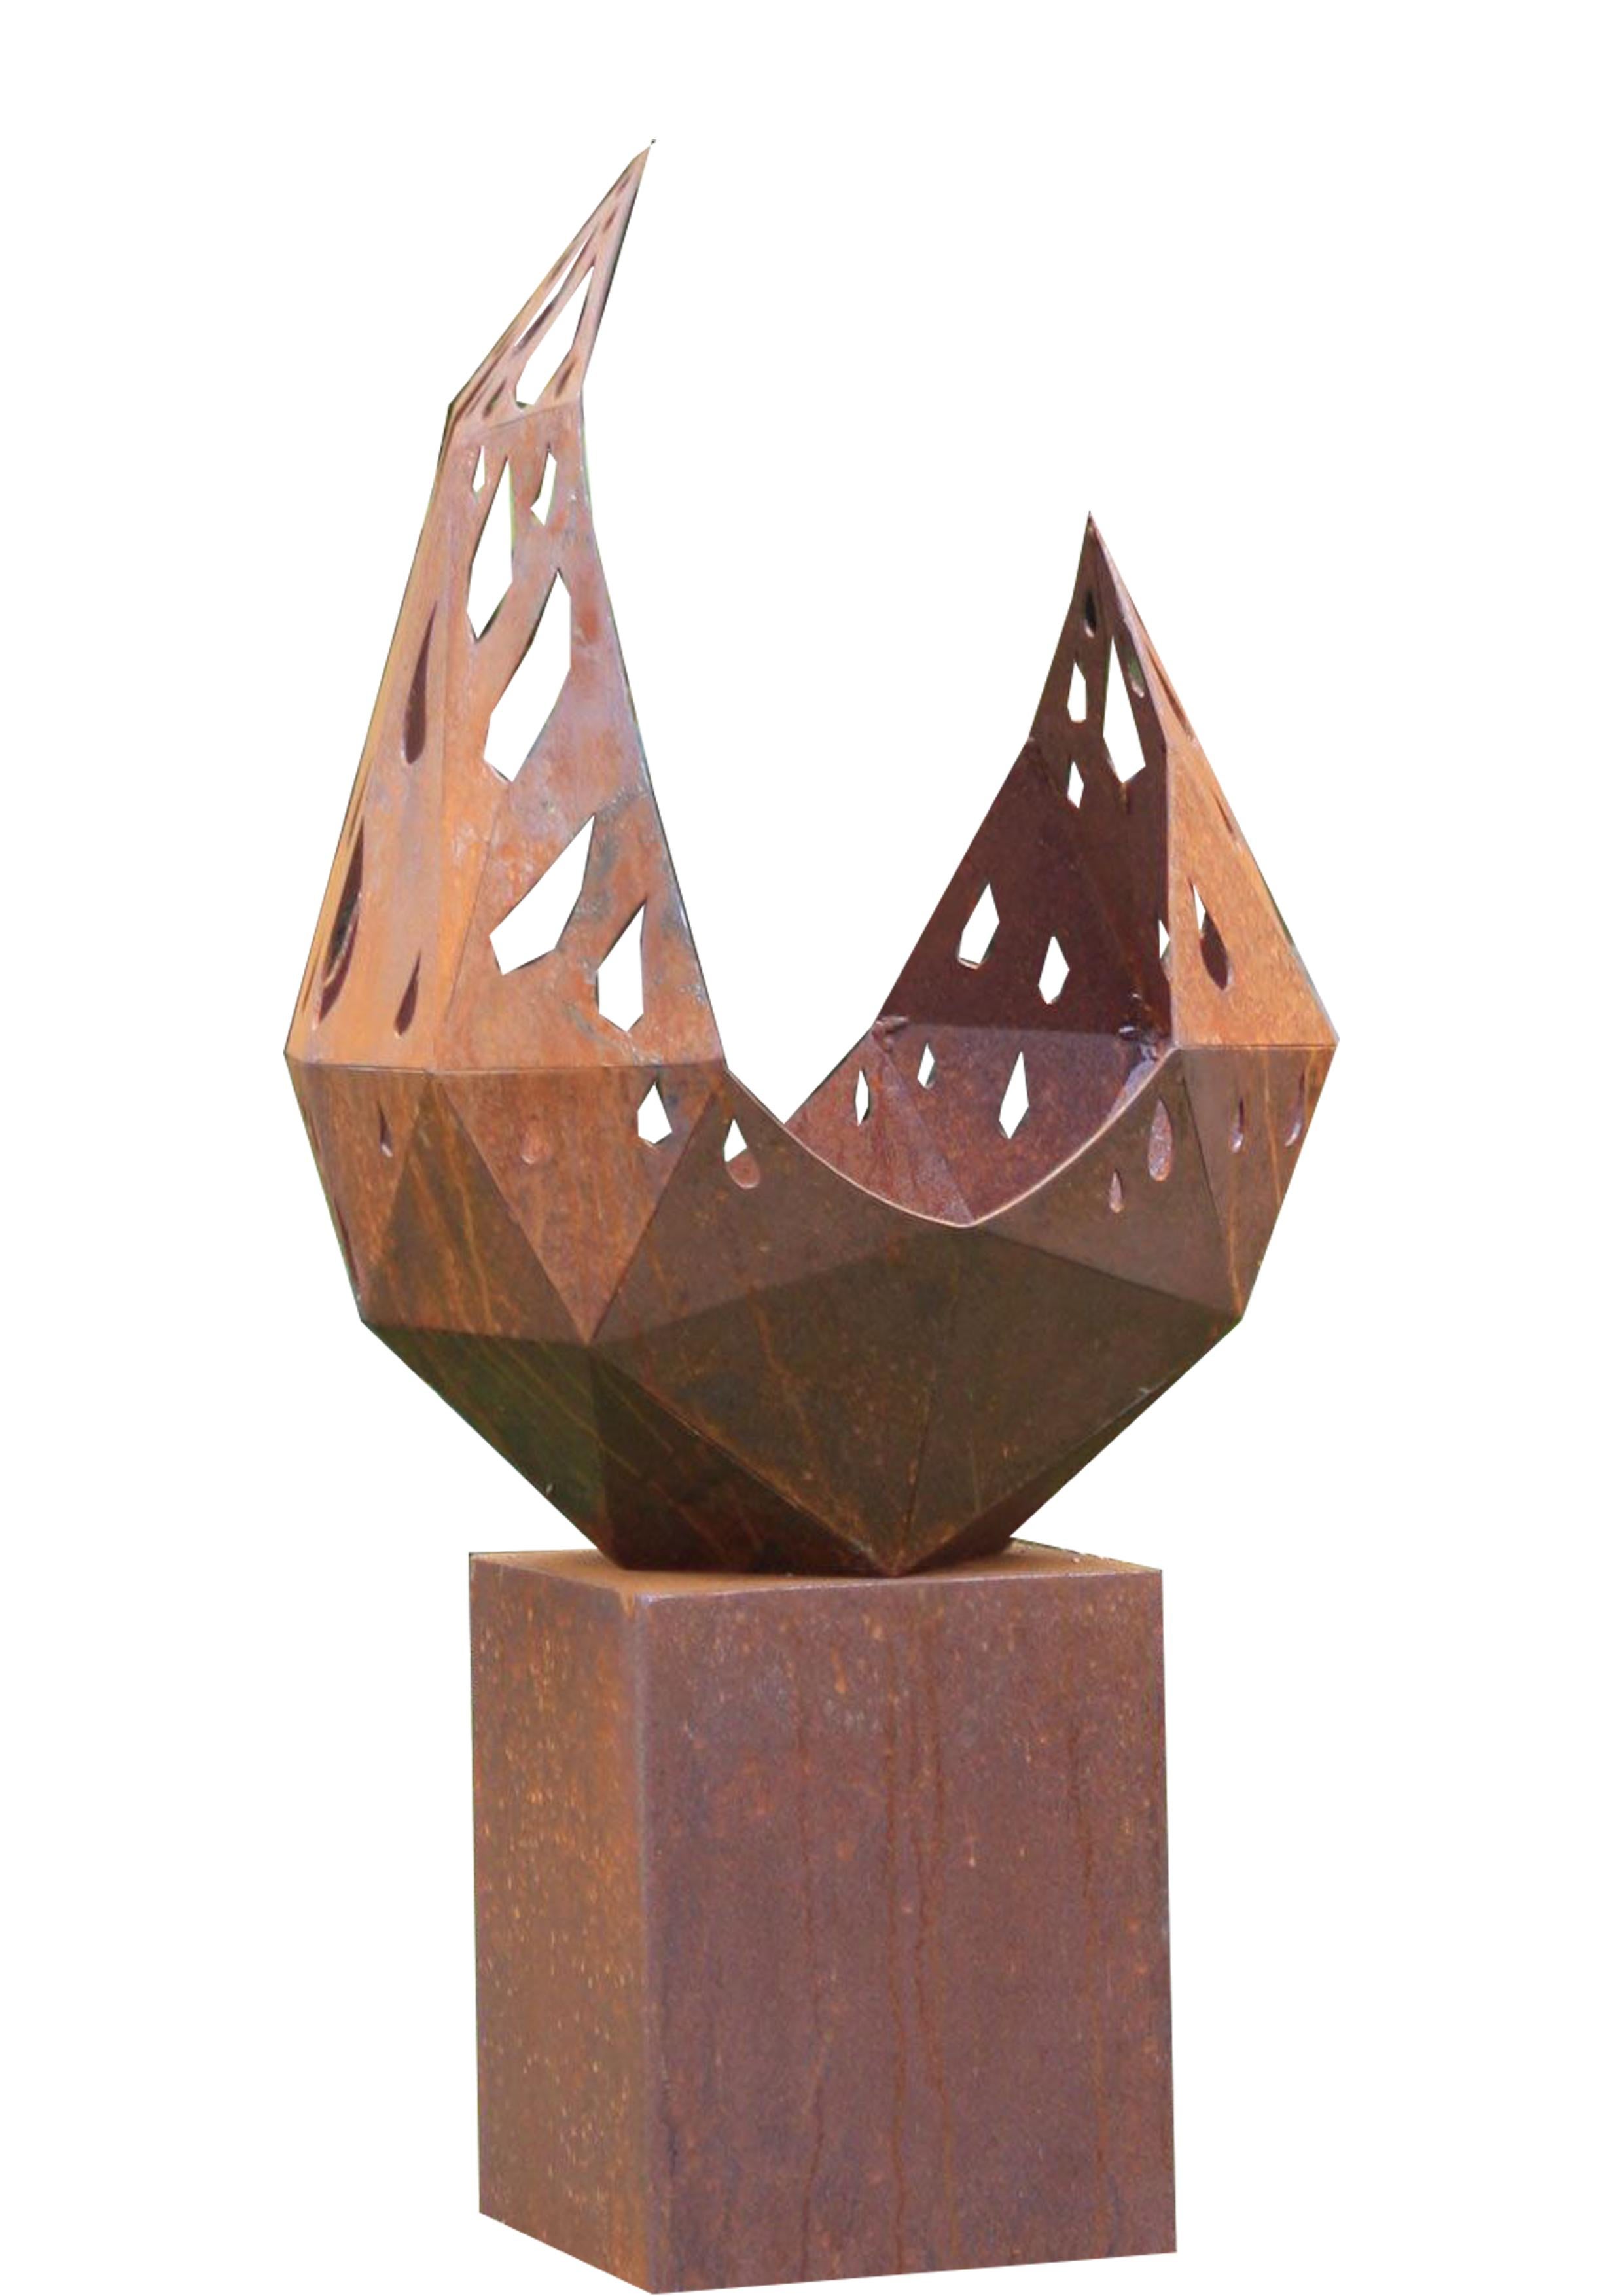 Firepit - "Drop" with angled pedestal - small - Art by Stefan Traloc